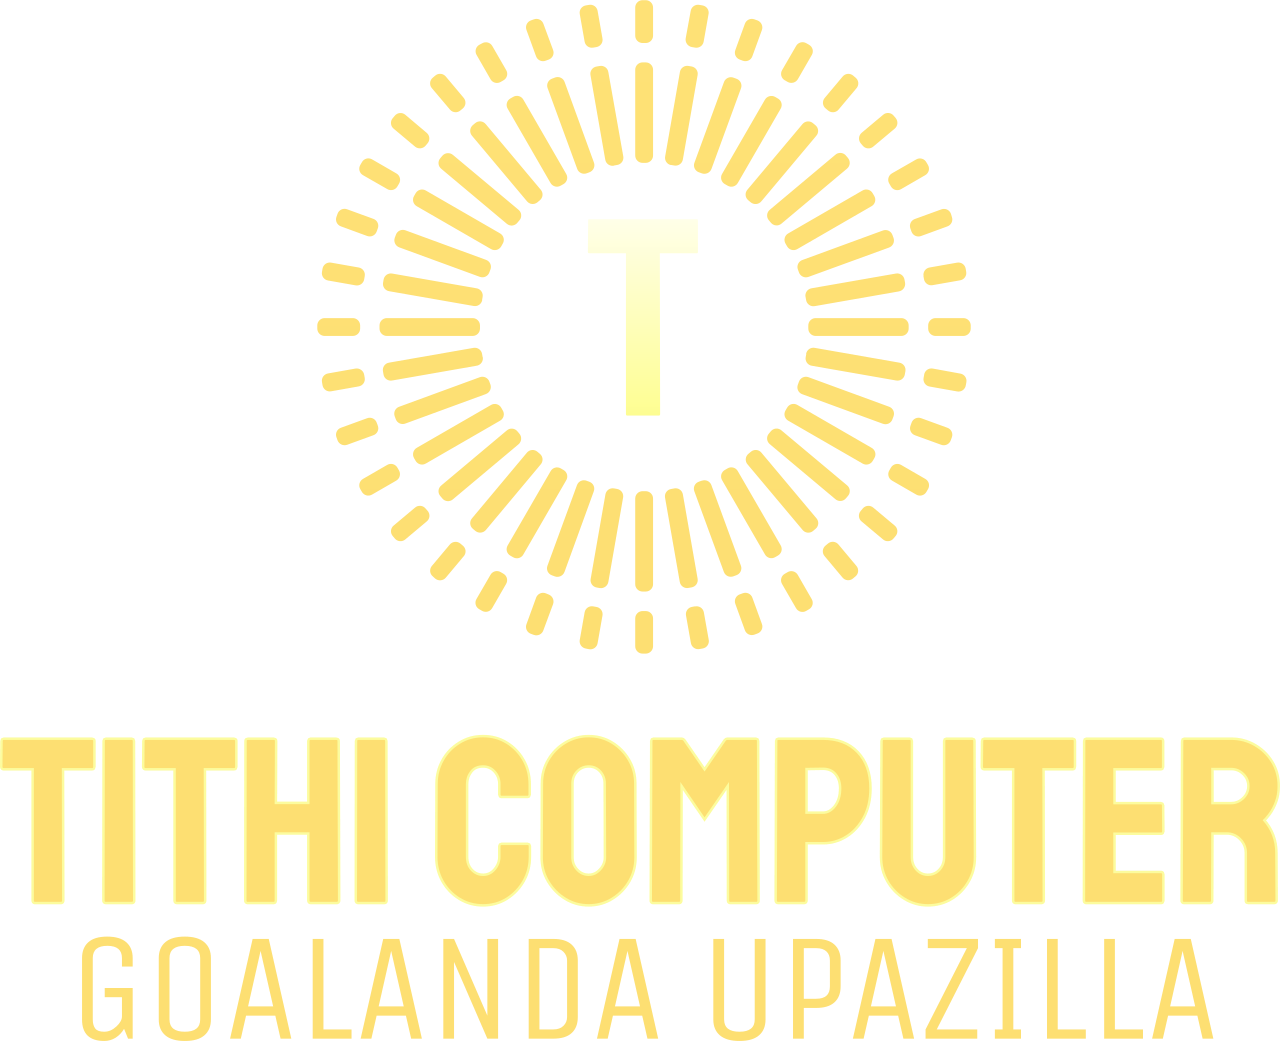 Tithi Computer's web page